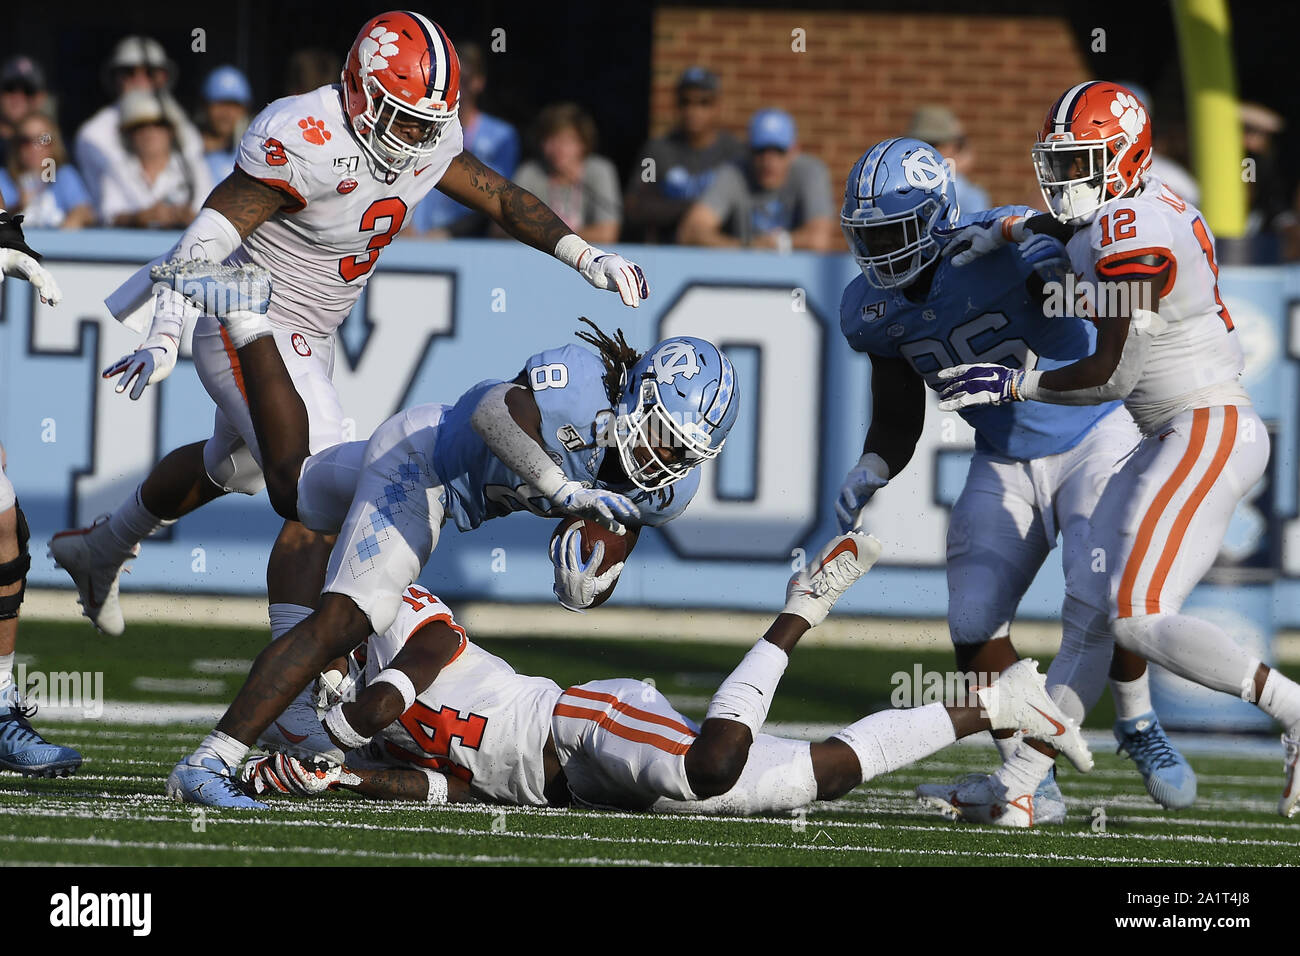 Chapel Hill, North Carolina, USA. 28th Sep, 2019. MICHAEL CARTER (8) of North Carolina carries the ball against DENZEL JOHNSON (14) of Clemson. The North Carolina Tar Heels played the Clemson Tigers in a football game that took place at the Kenan Memorial Stadium in Chapel Hill, N.C. on Saturday, September 28, 2019. Credit: Fabian Radulescu/ZUMA Wire/Alamy Live News Stock Photo